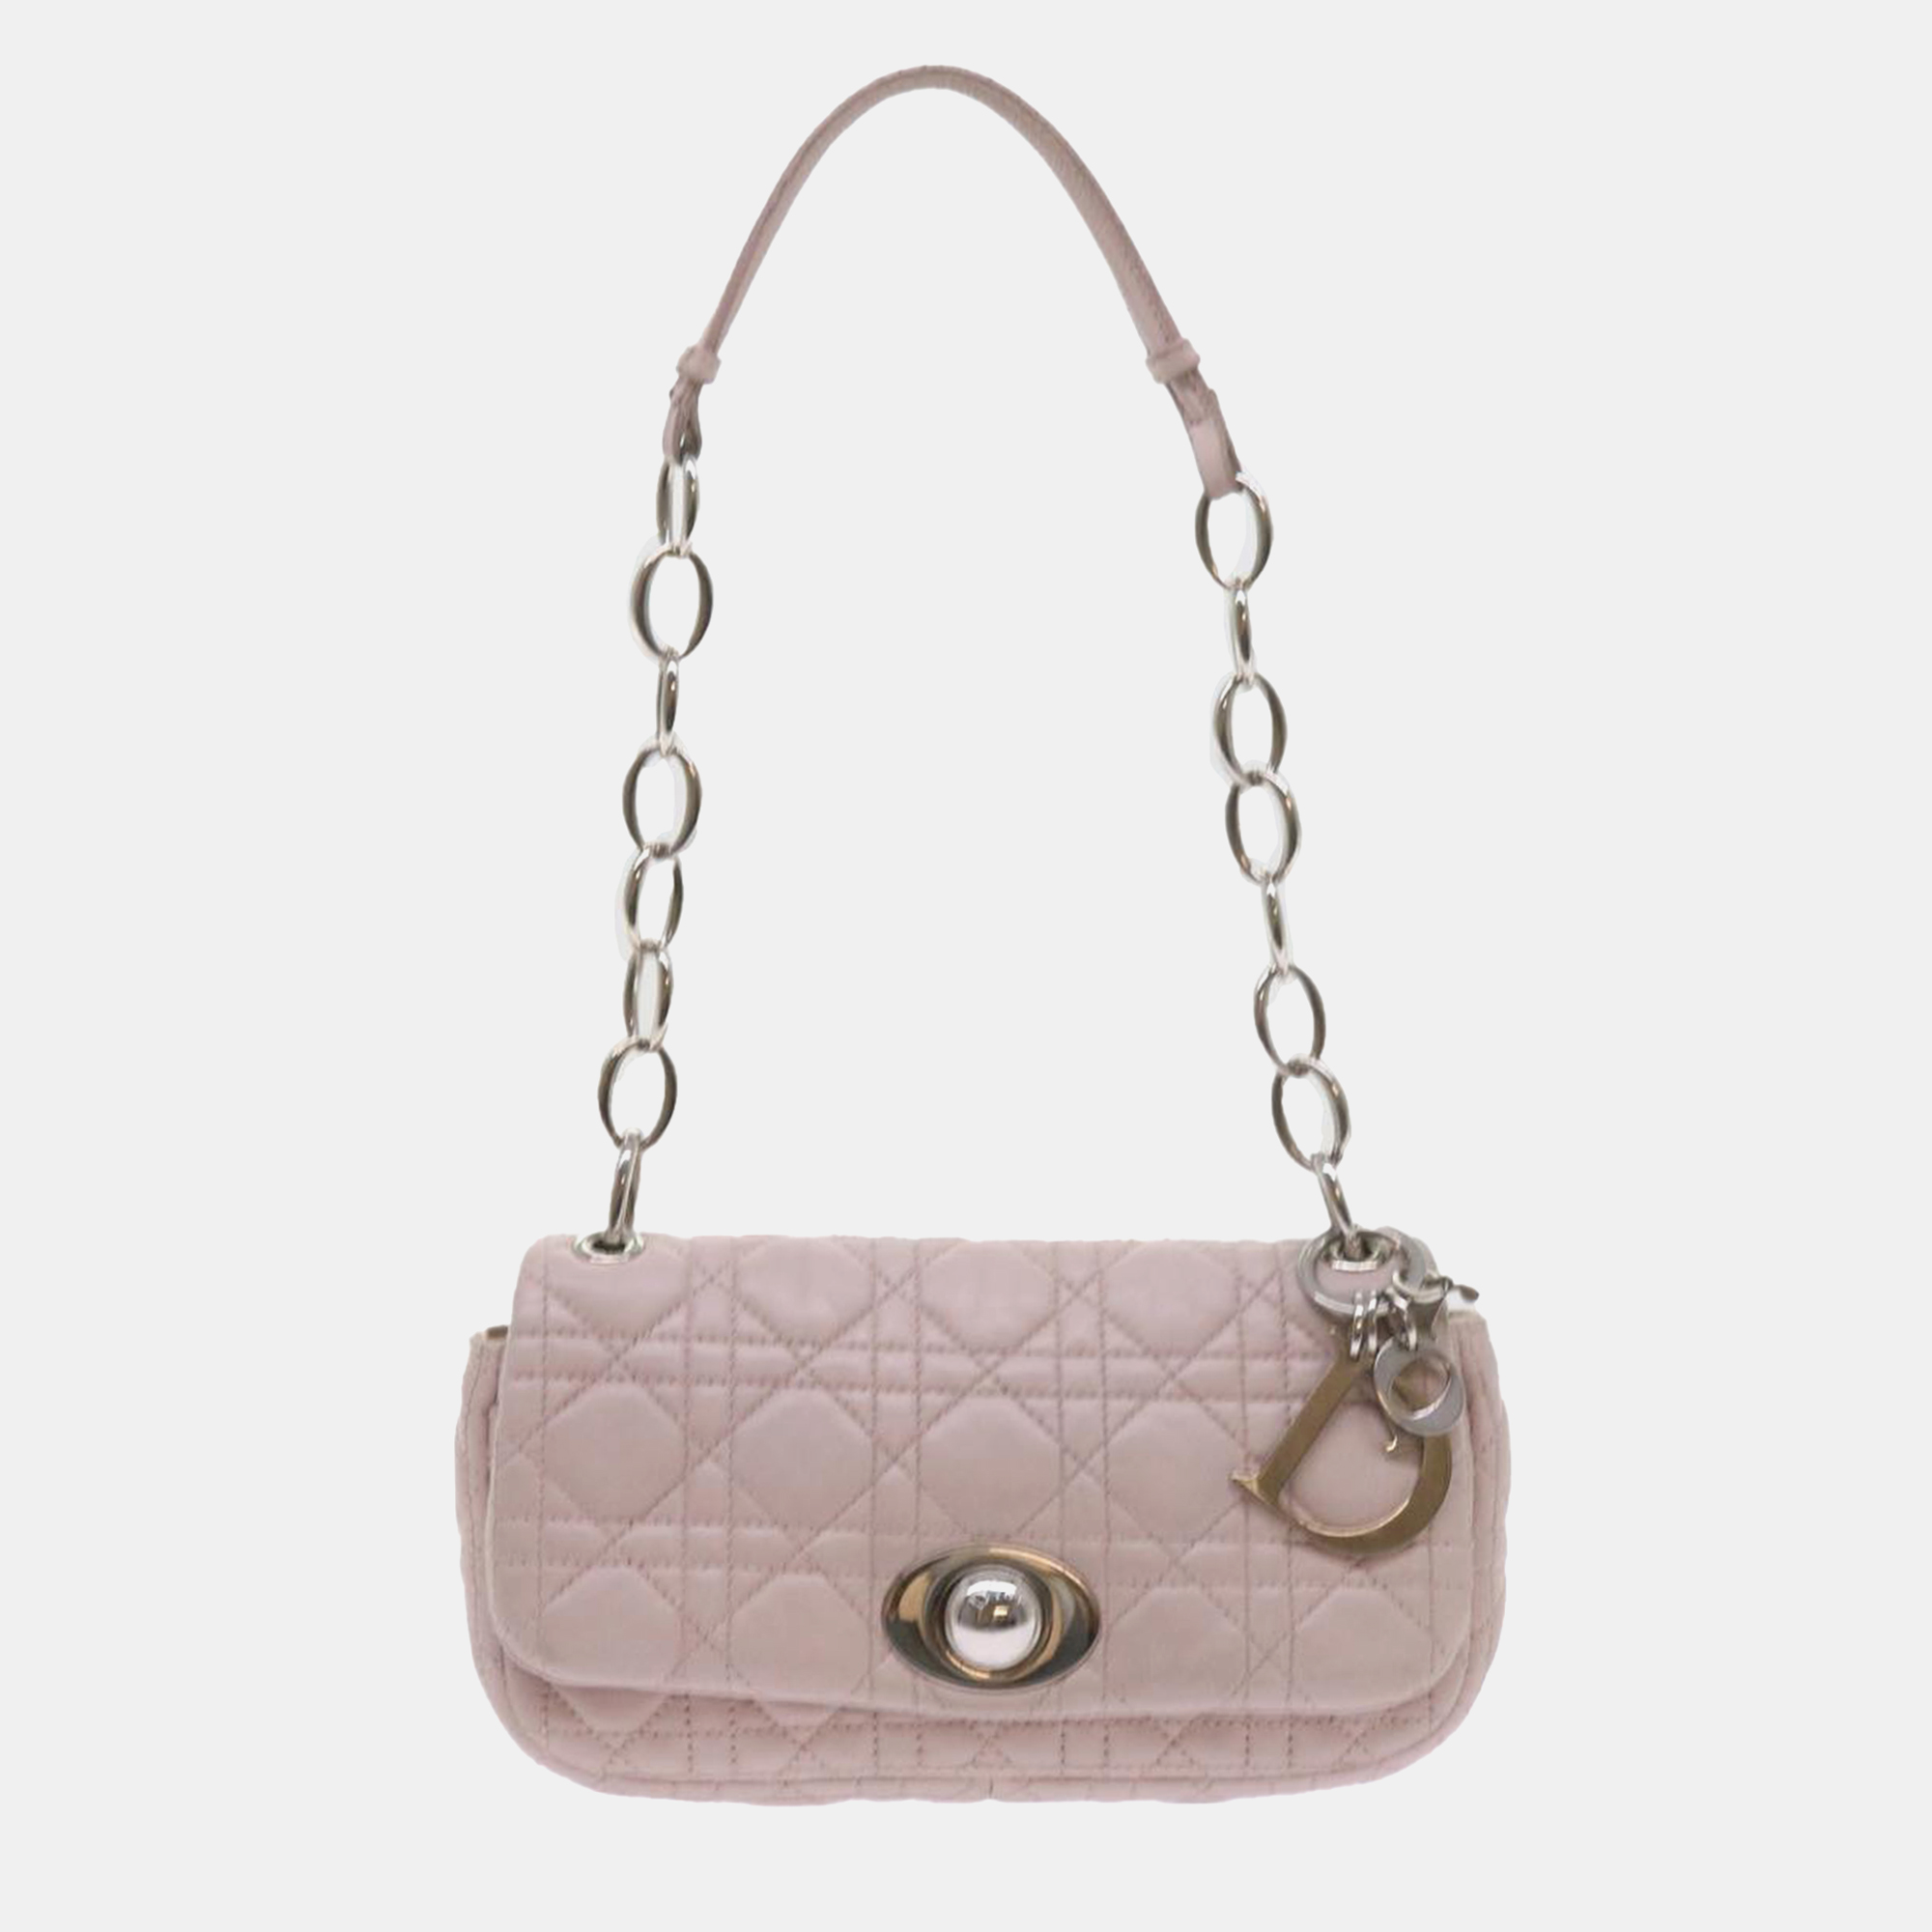 Dior pink leather rendezvous clutch bag